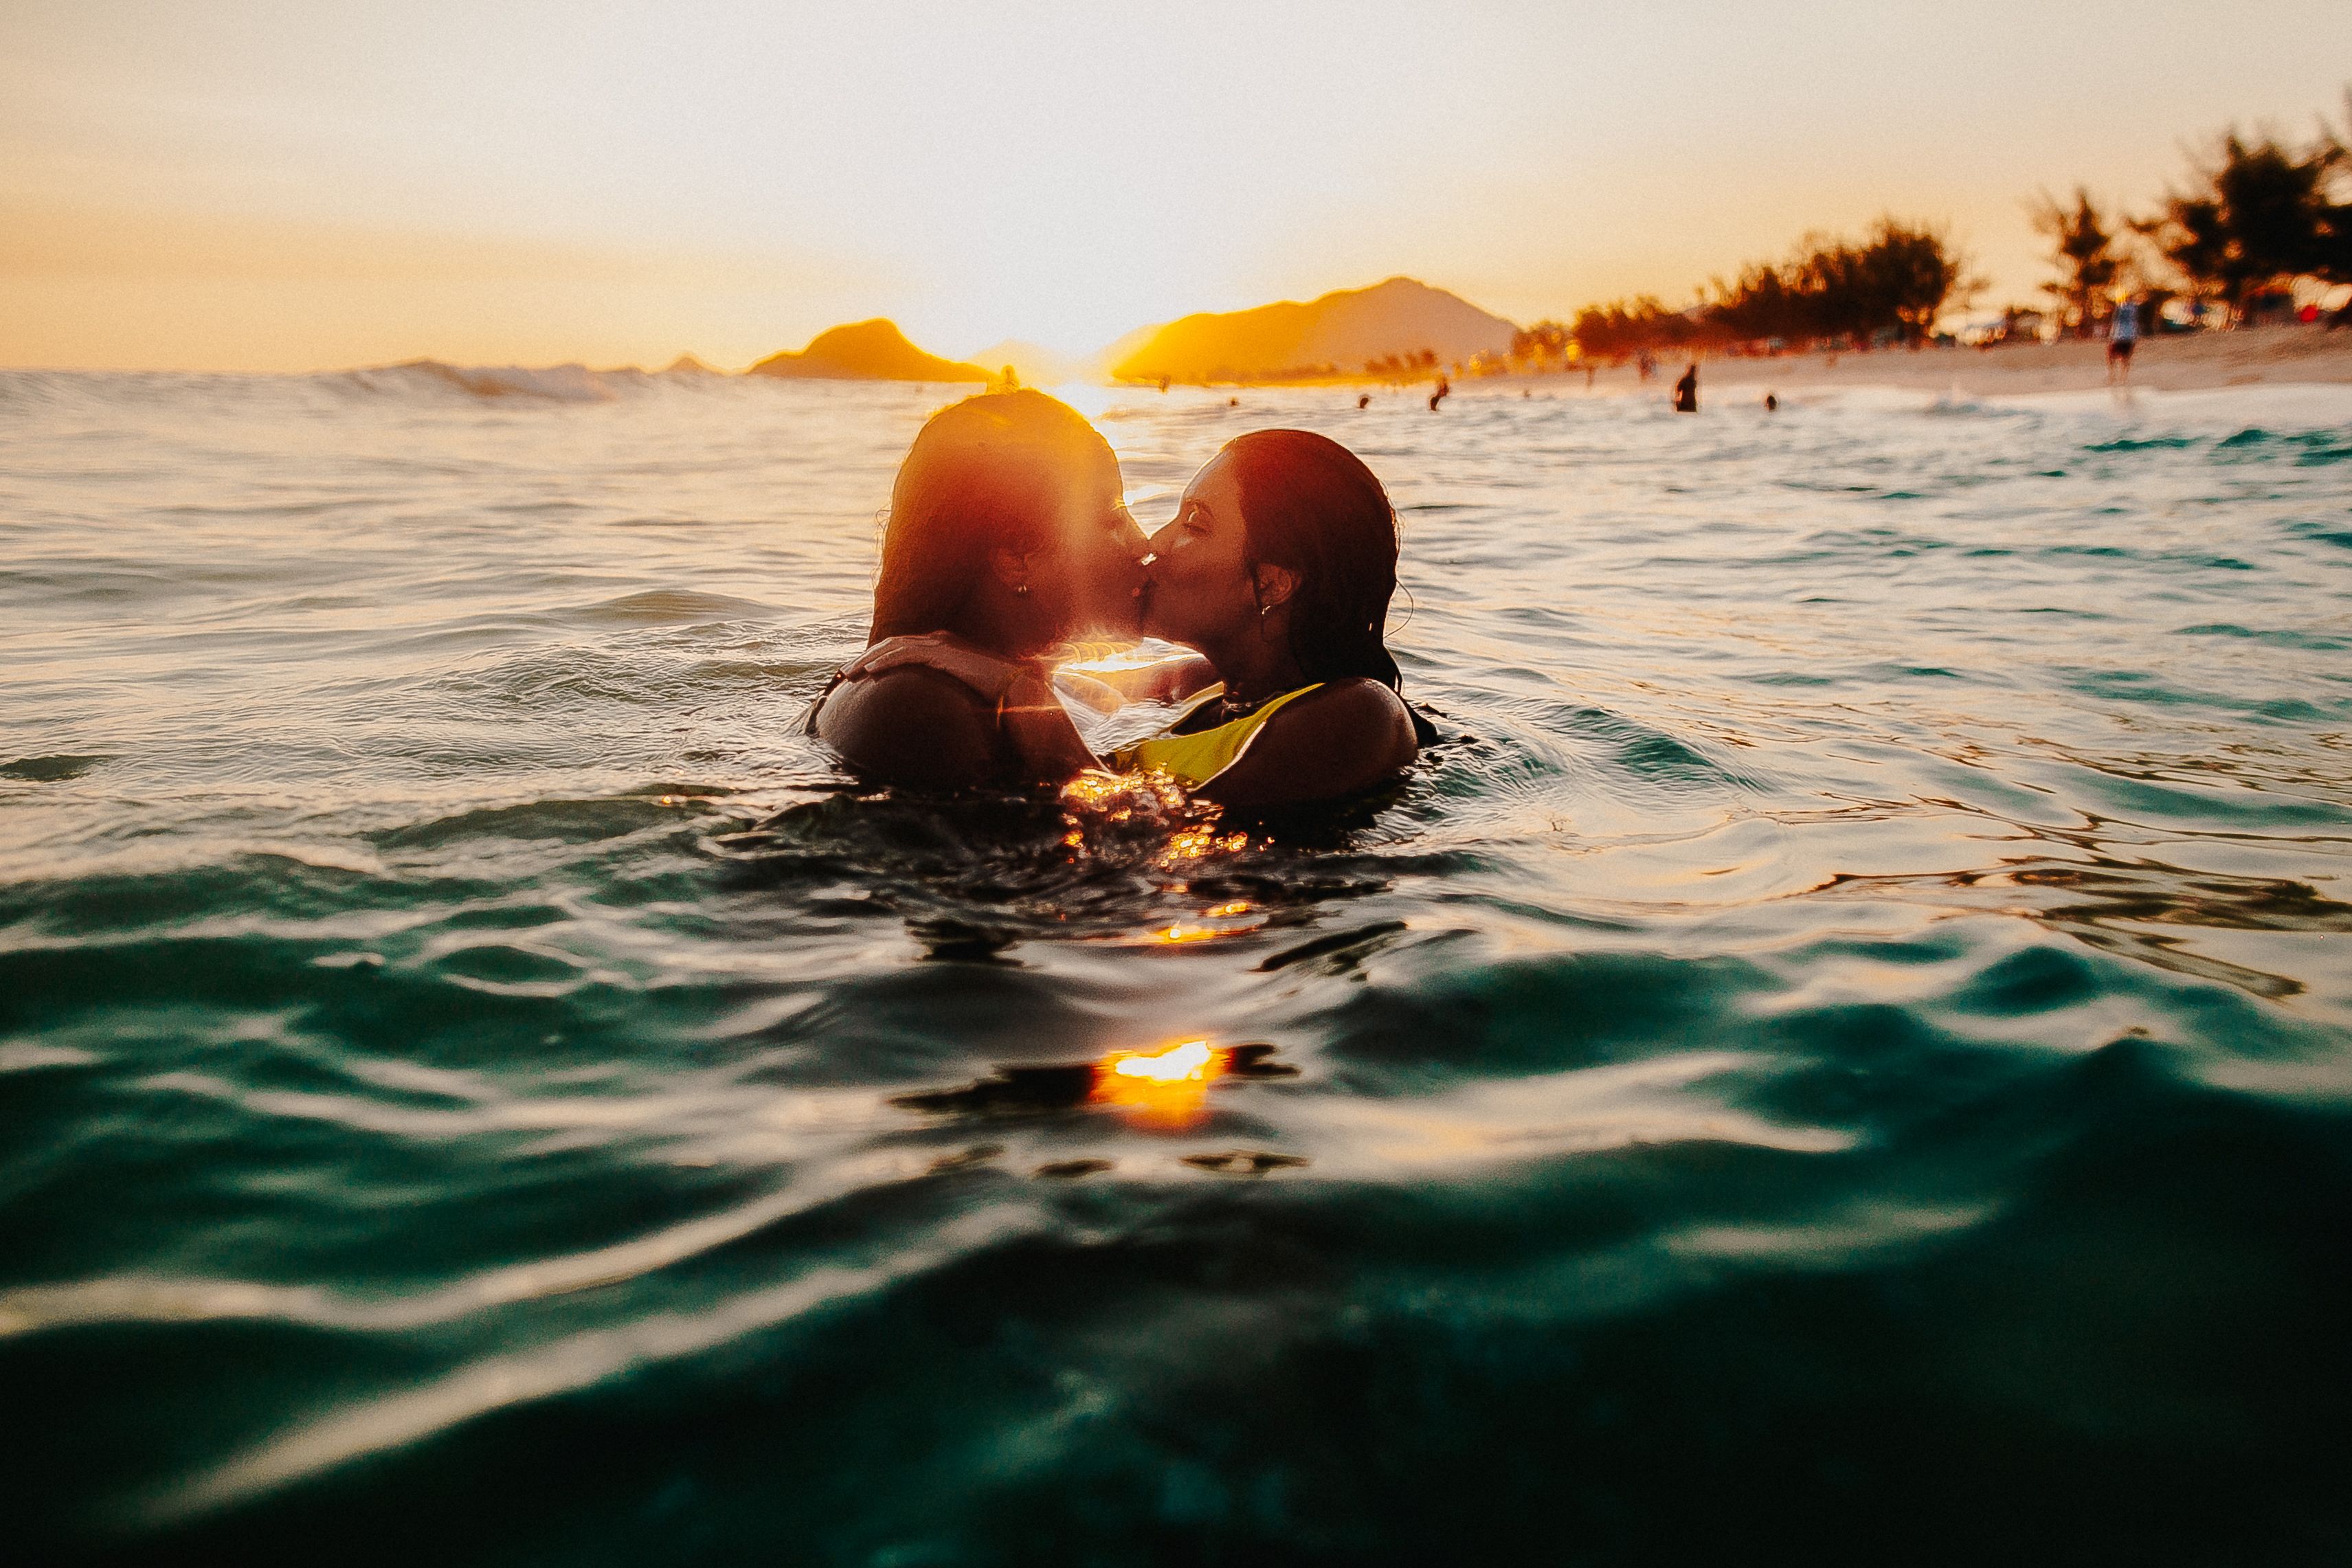 11 Honeymoon Sex Tips to Make This a Vacation to Remember